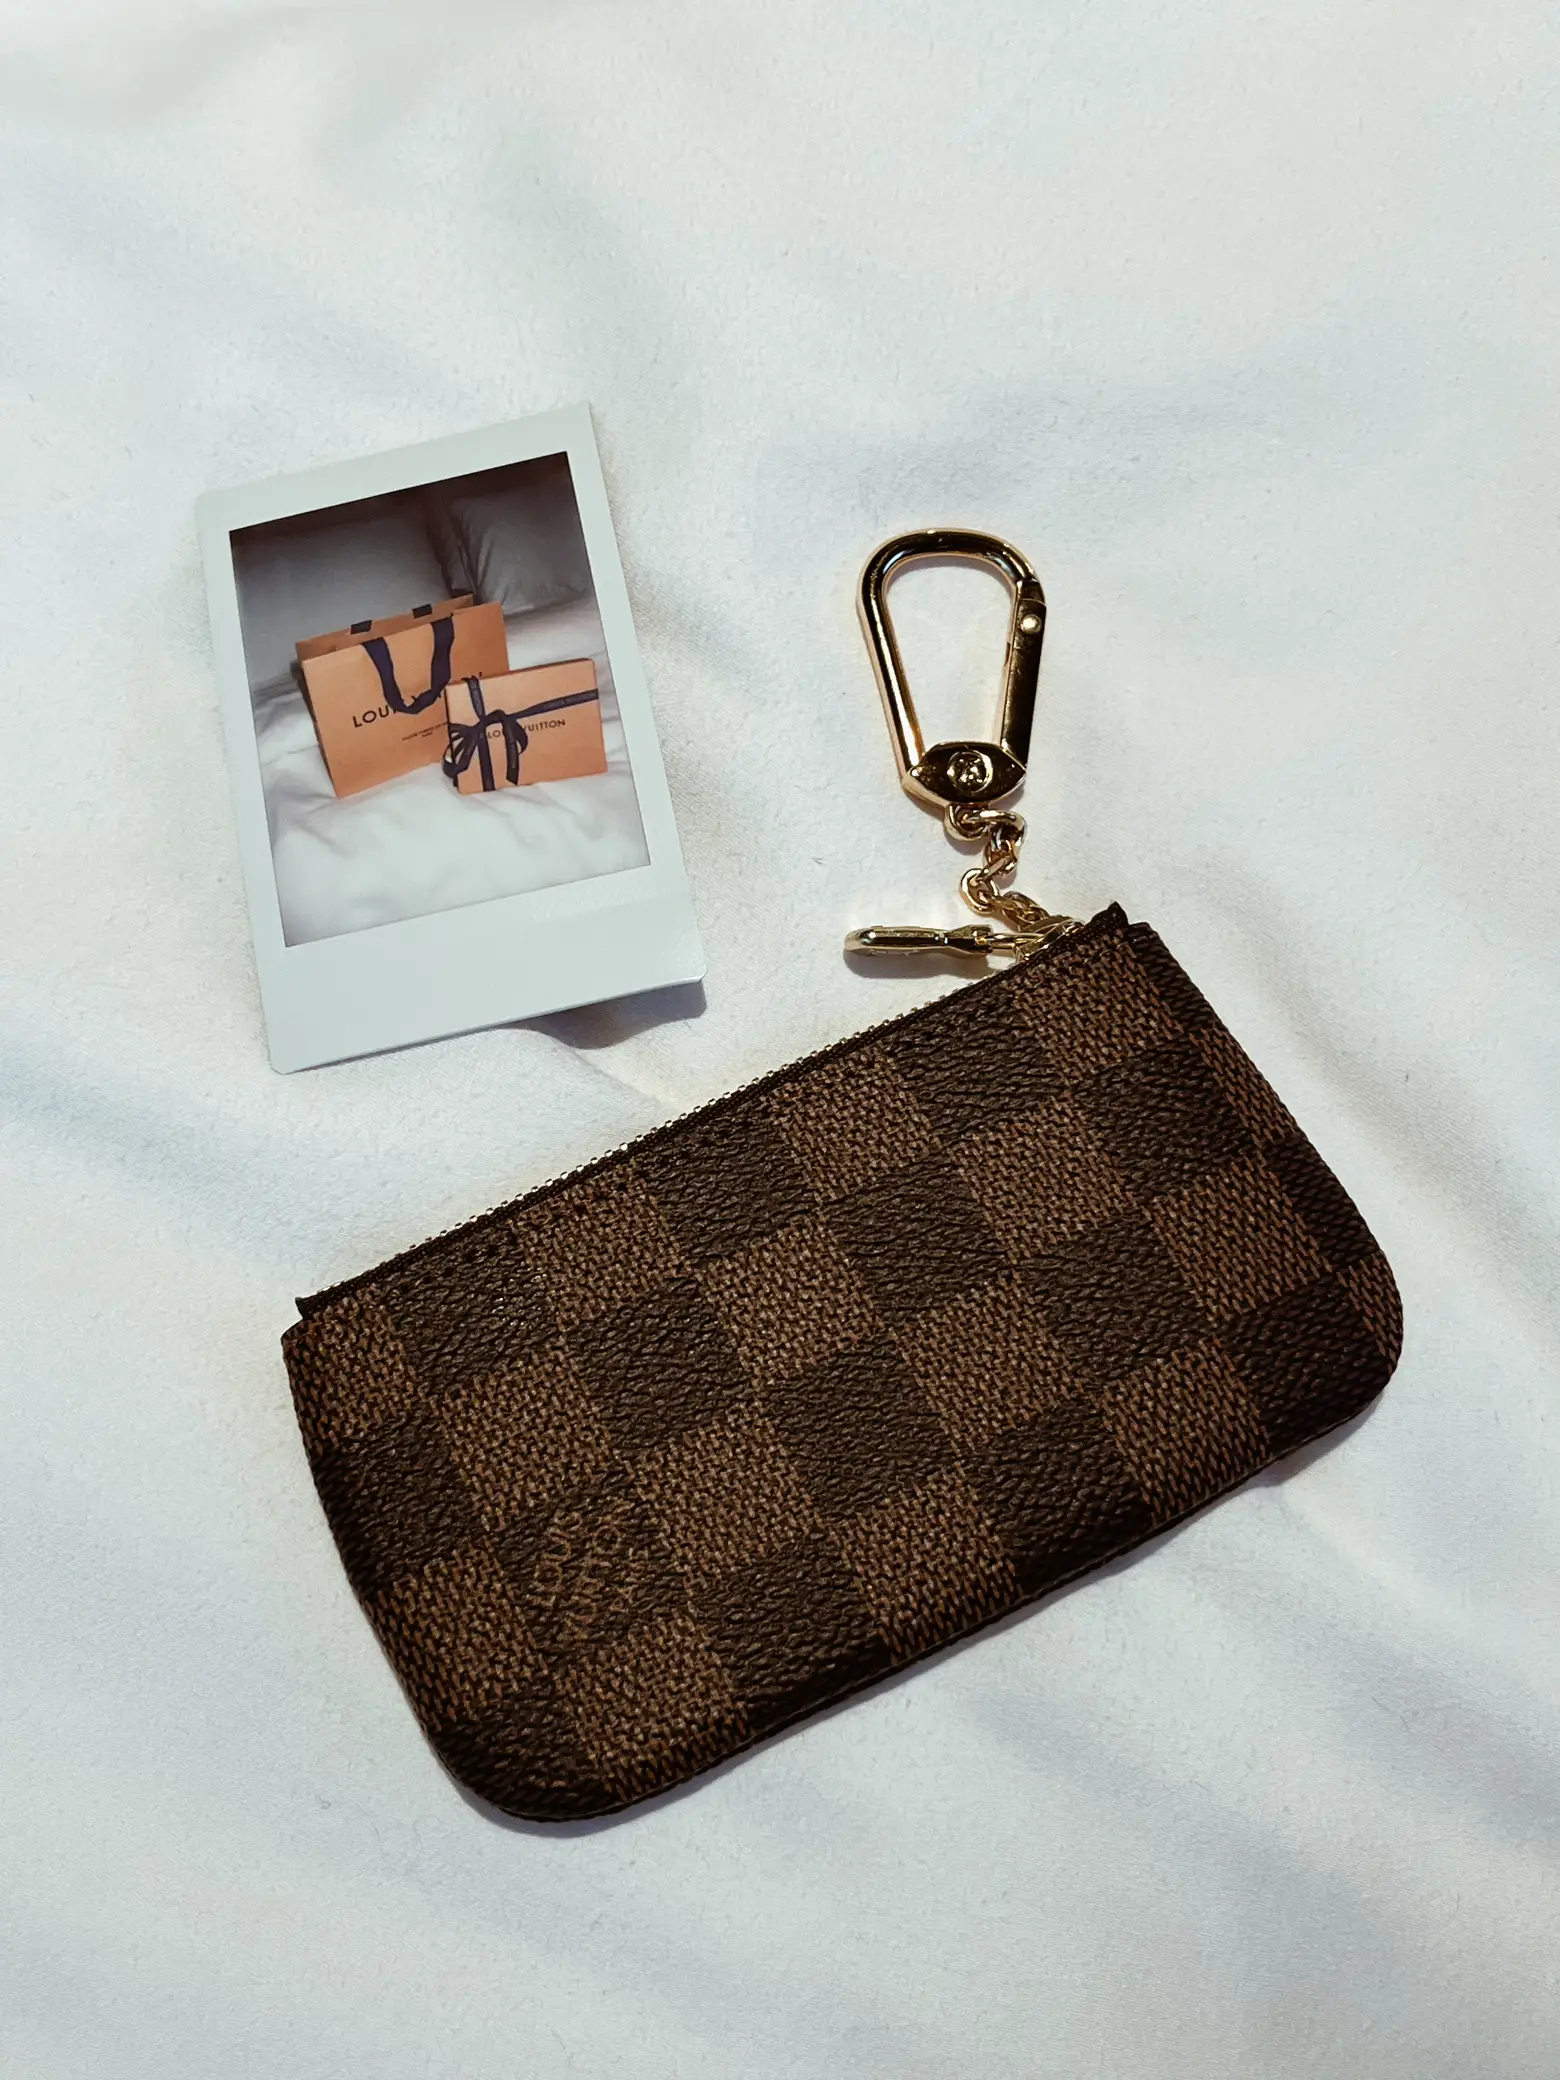 LV key pouch 👝✨, Gallery posted by Grace